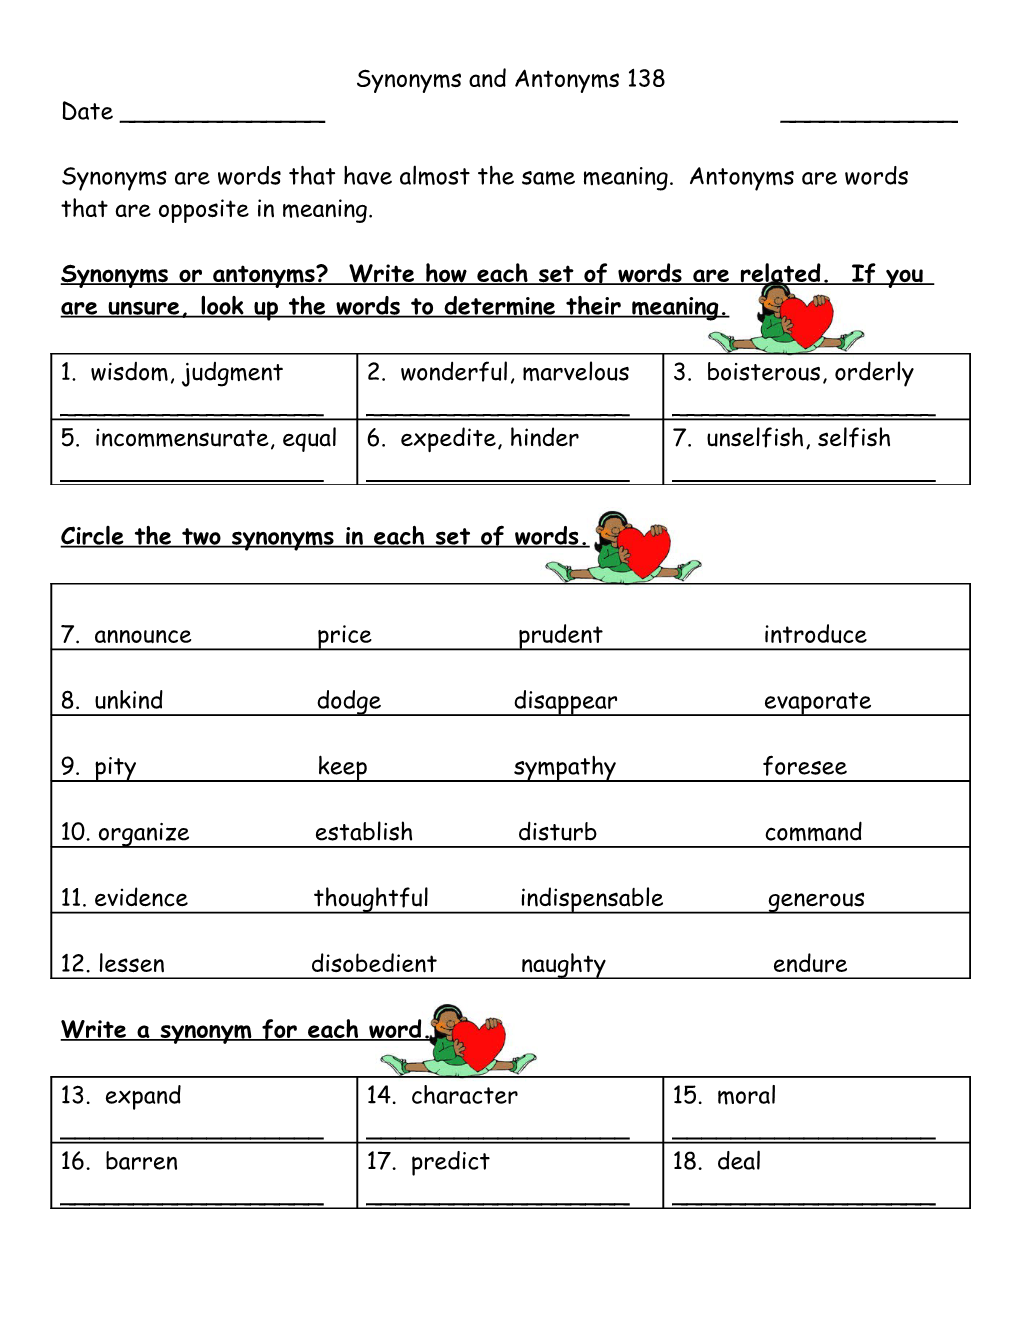 Synonyms and Antonyms 138